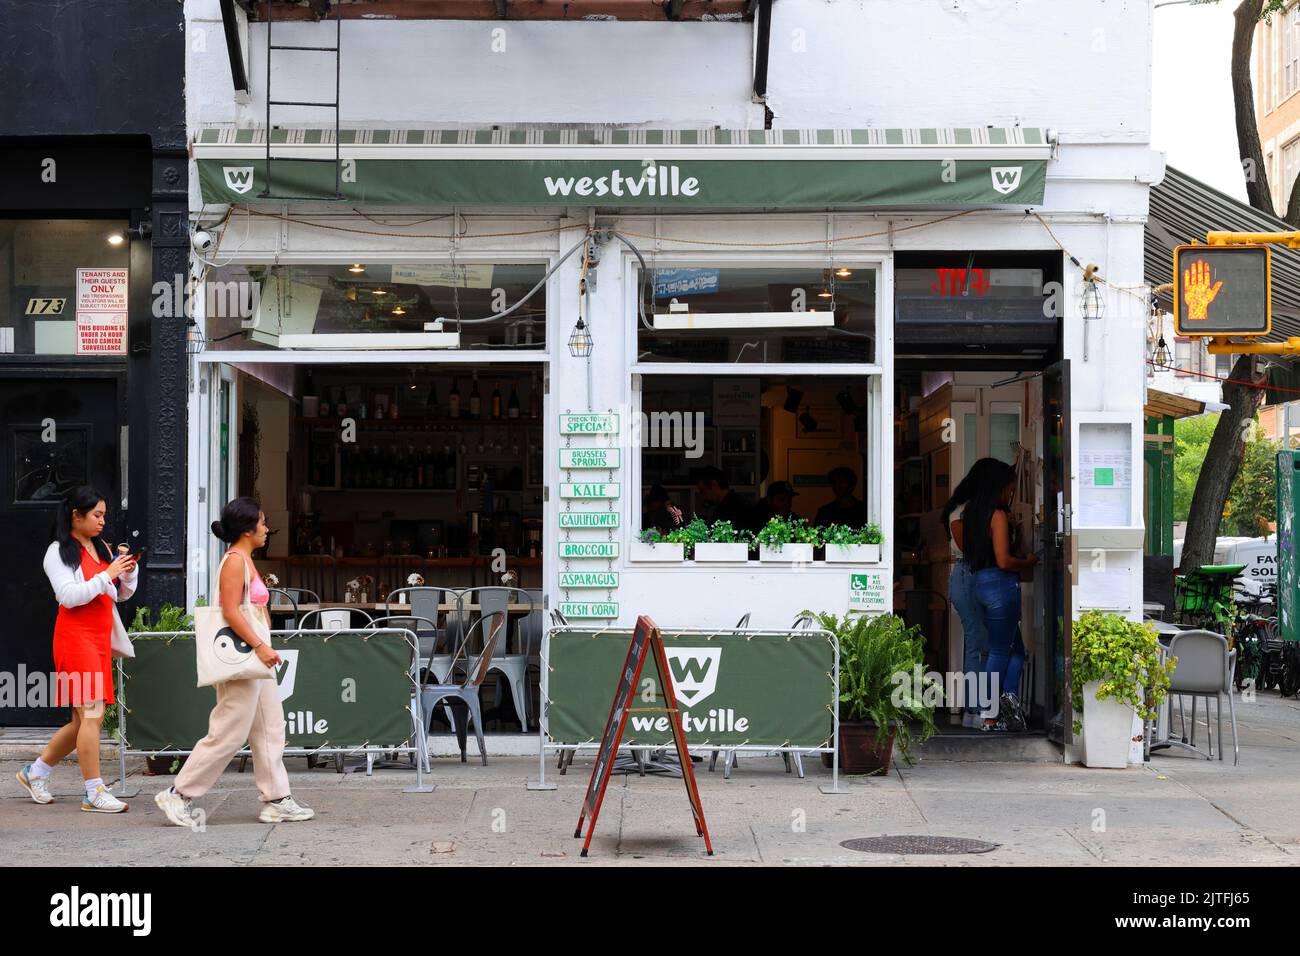 Westville, 173 Avenue A, New York, NYC storefront photo of a American comfort food restaurant in Manhattan's East Village neighborhood. Stock Photo